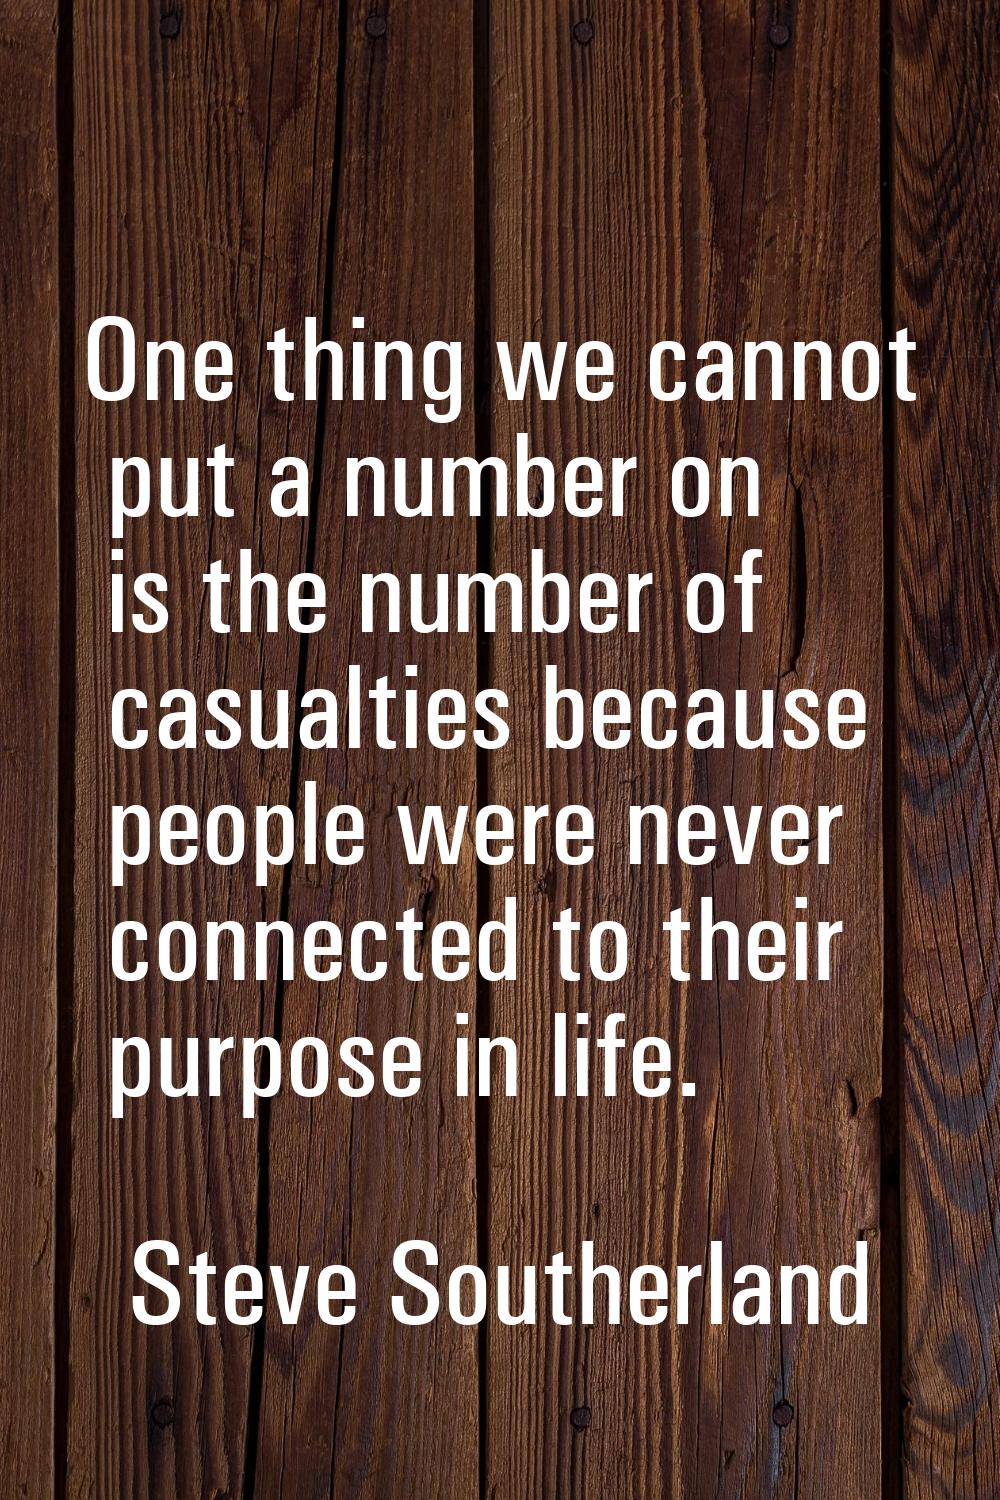 One thing we cannot put a number on is the number of casualties because people were never connected